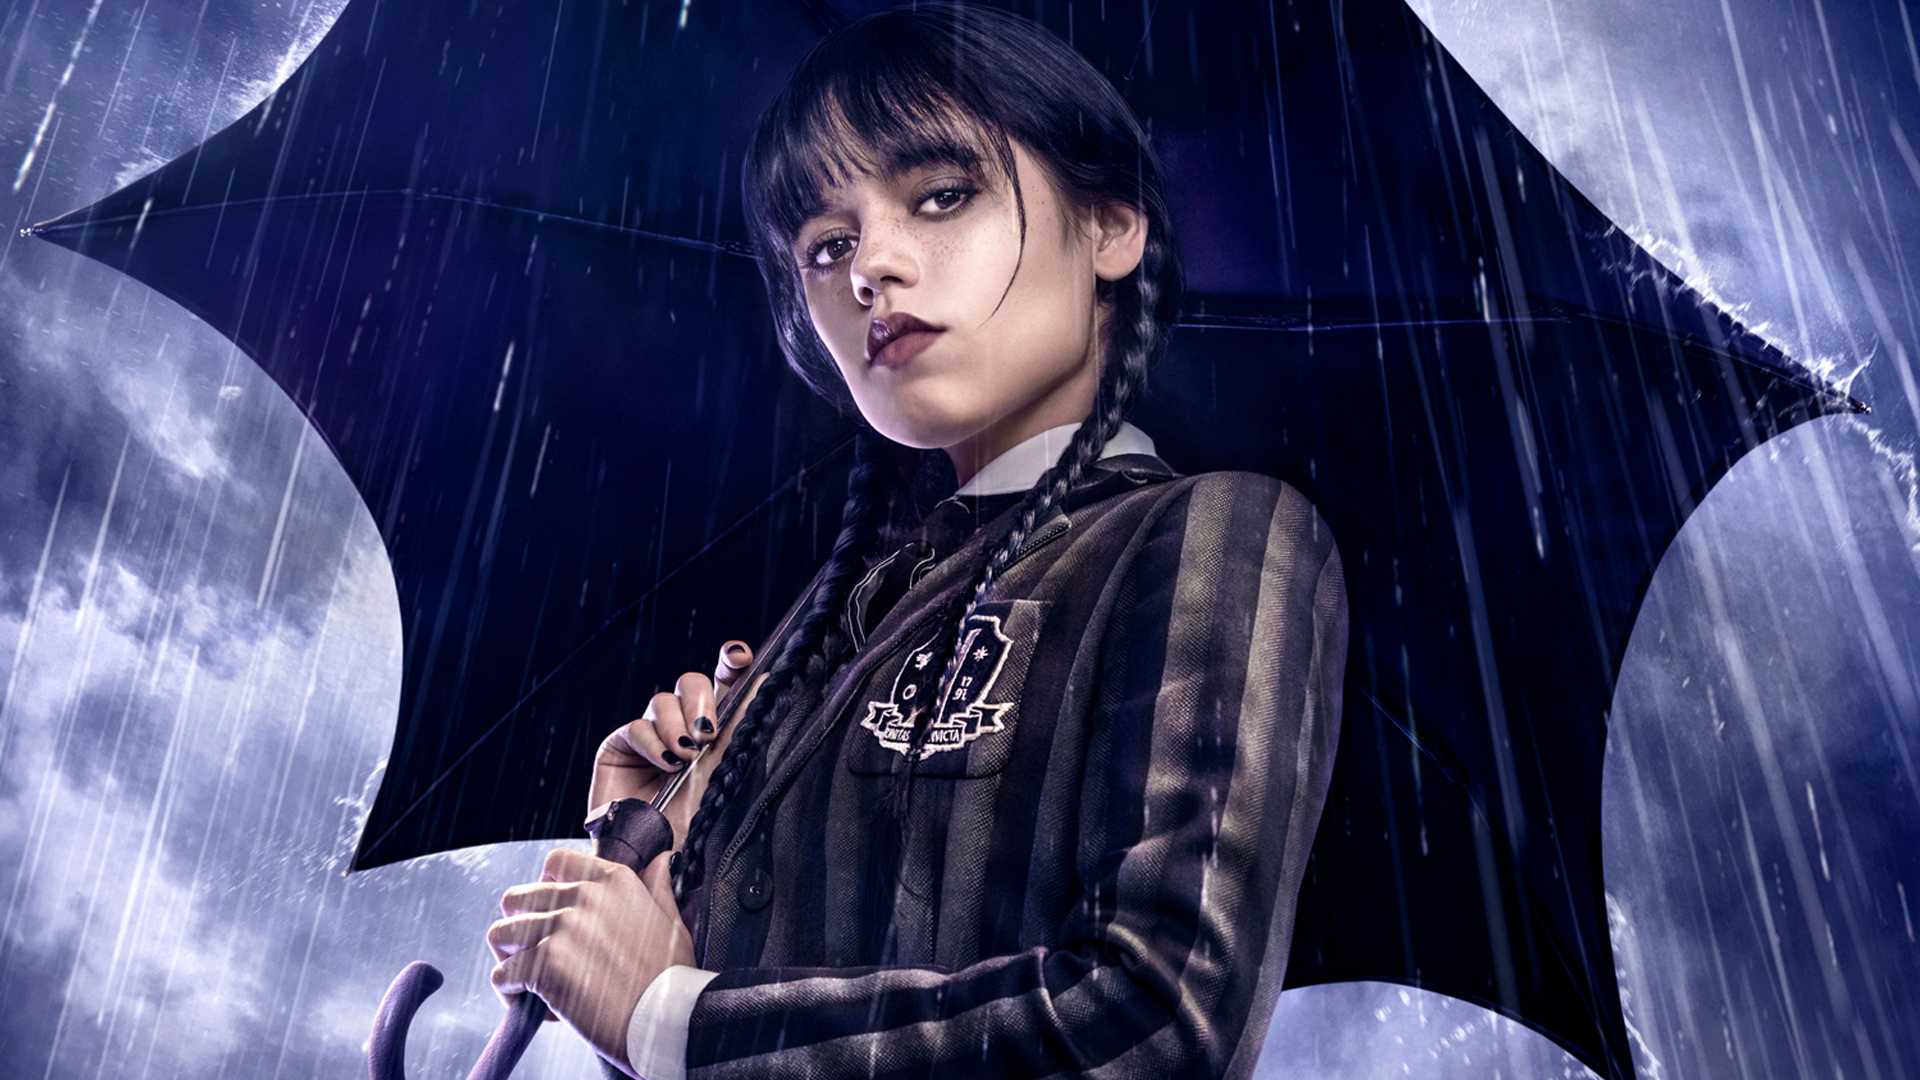 Wednesday Addams Series on Netflix: Release Date and Time, Cast, Plot - GameRevolution